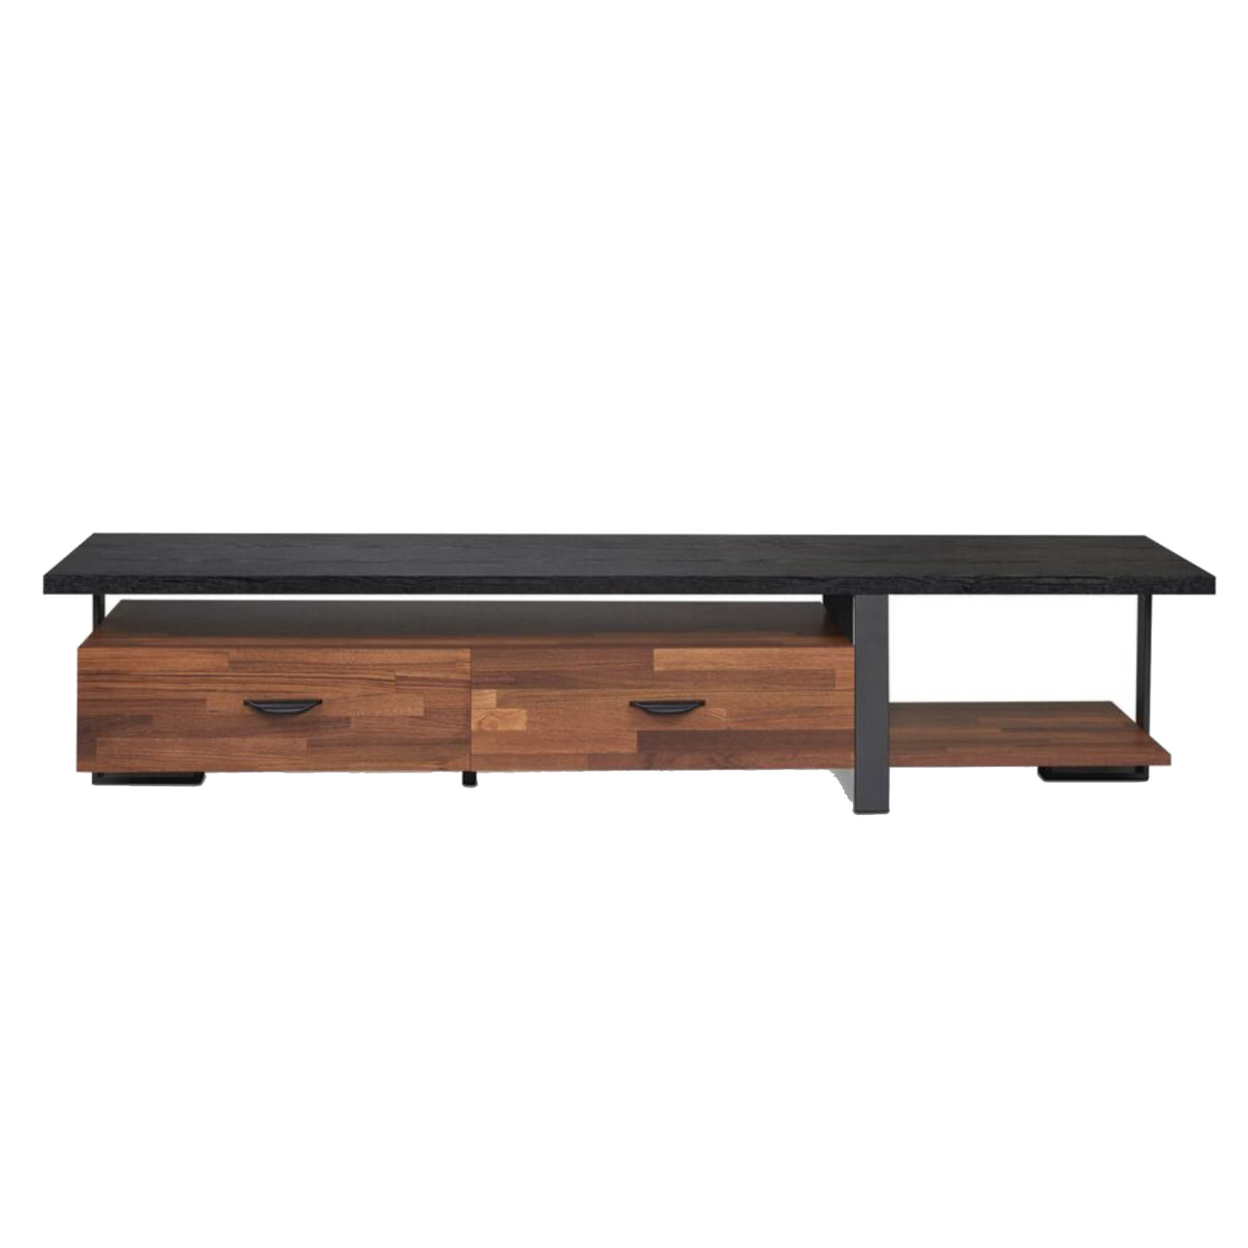 Metal Framed Wooden TV Stand Straight With Two Drawers And Open Shelf, Black And Brown- Saltoro Sherpi